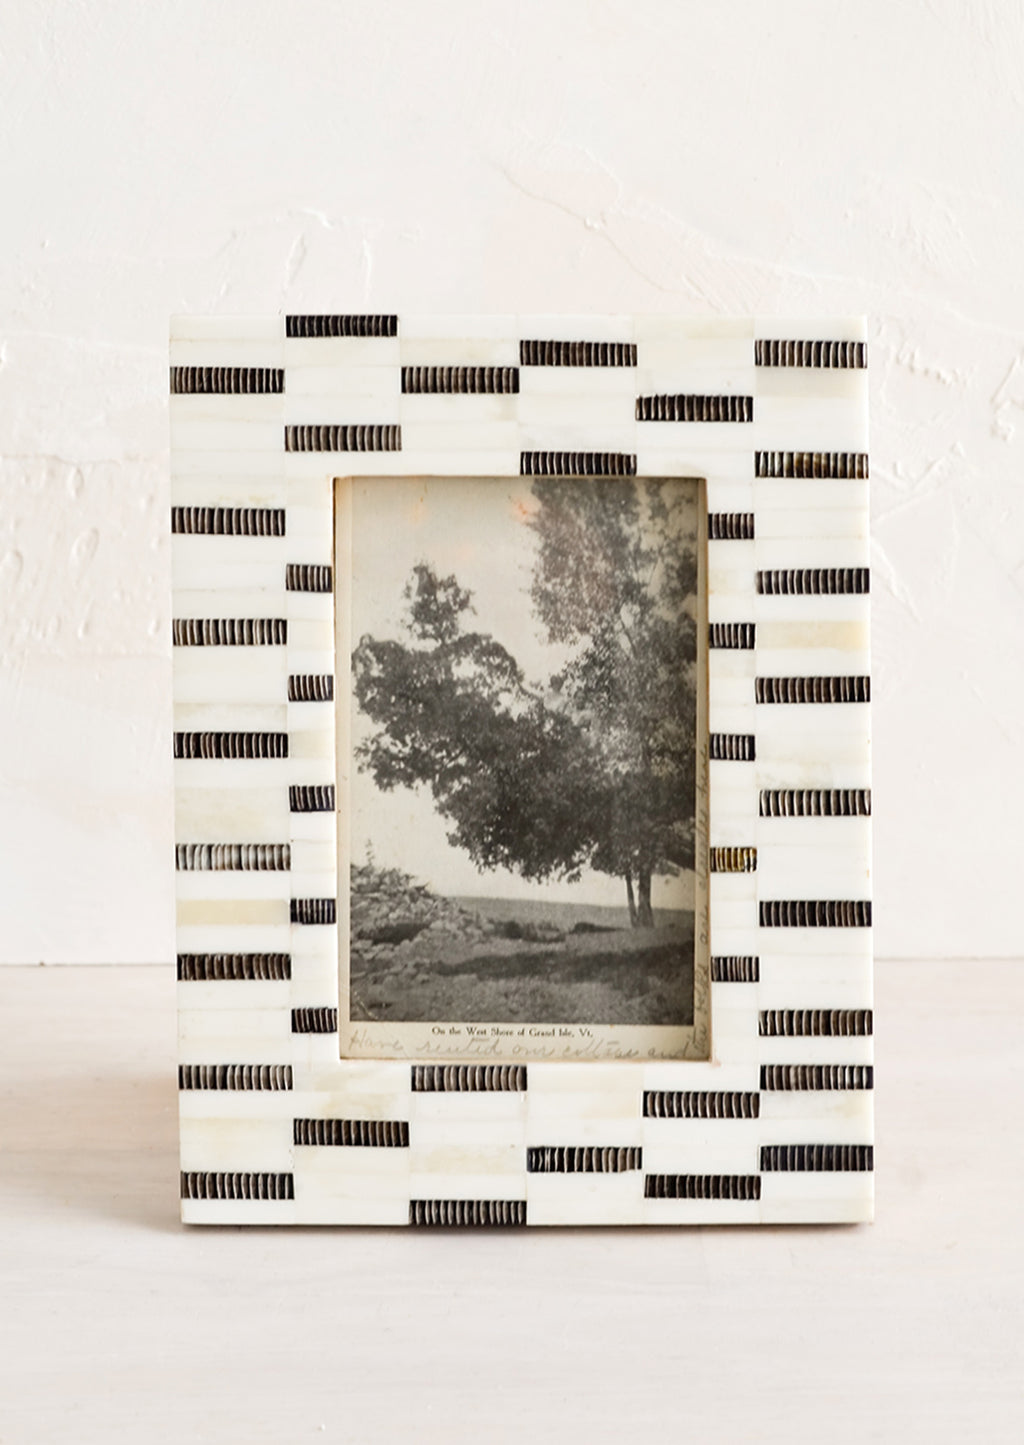 1: A tabletop picture frame in black and white dashes pattern.